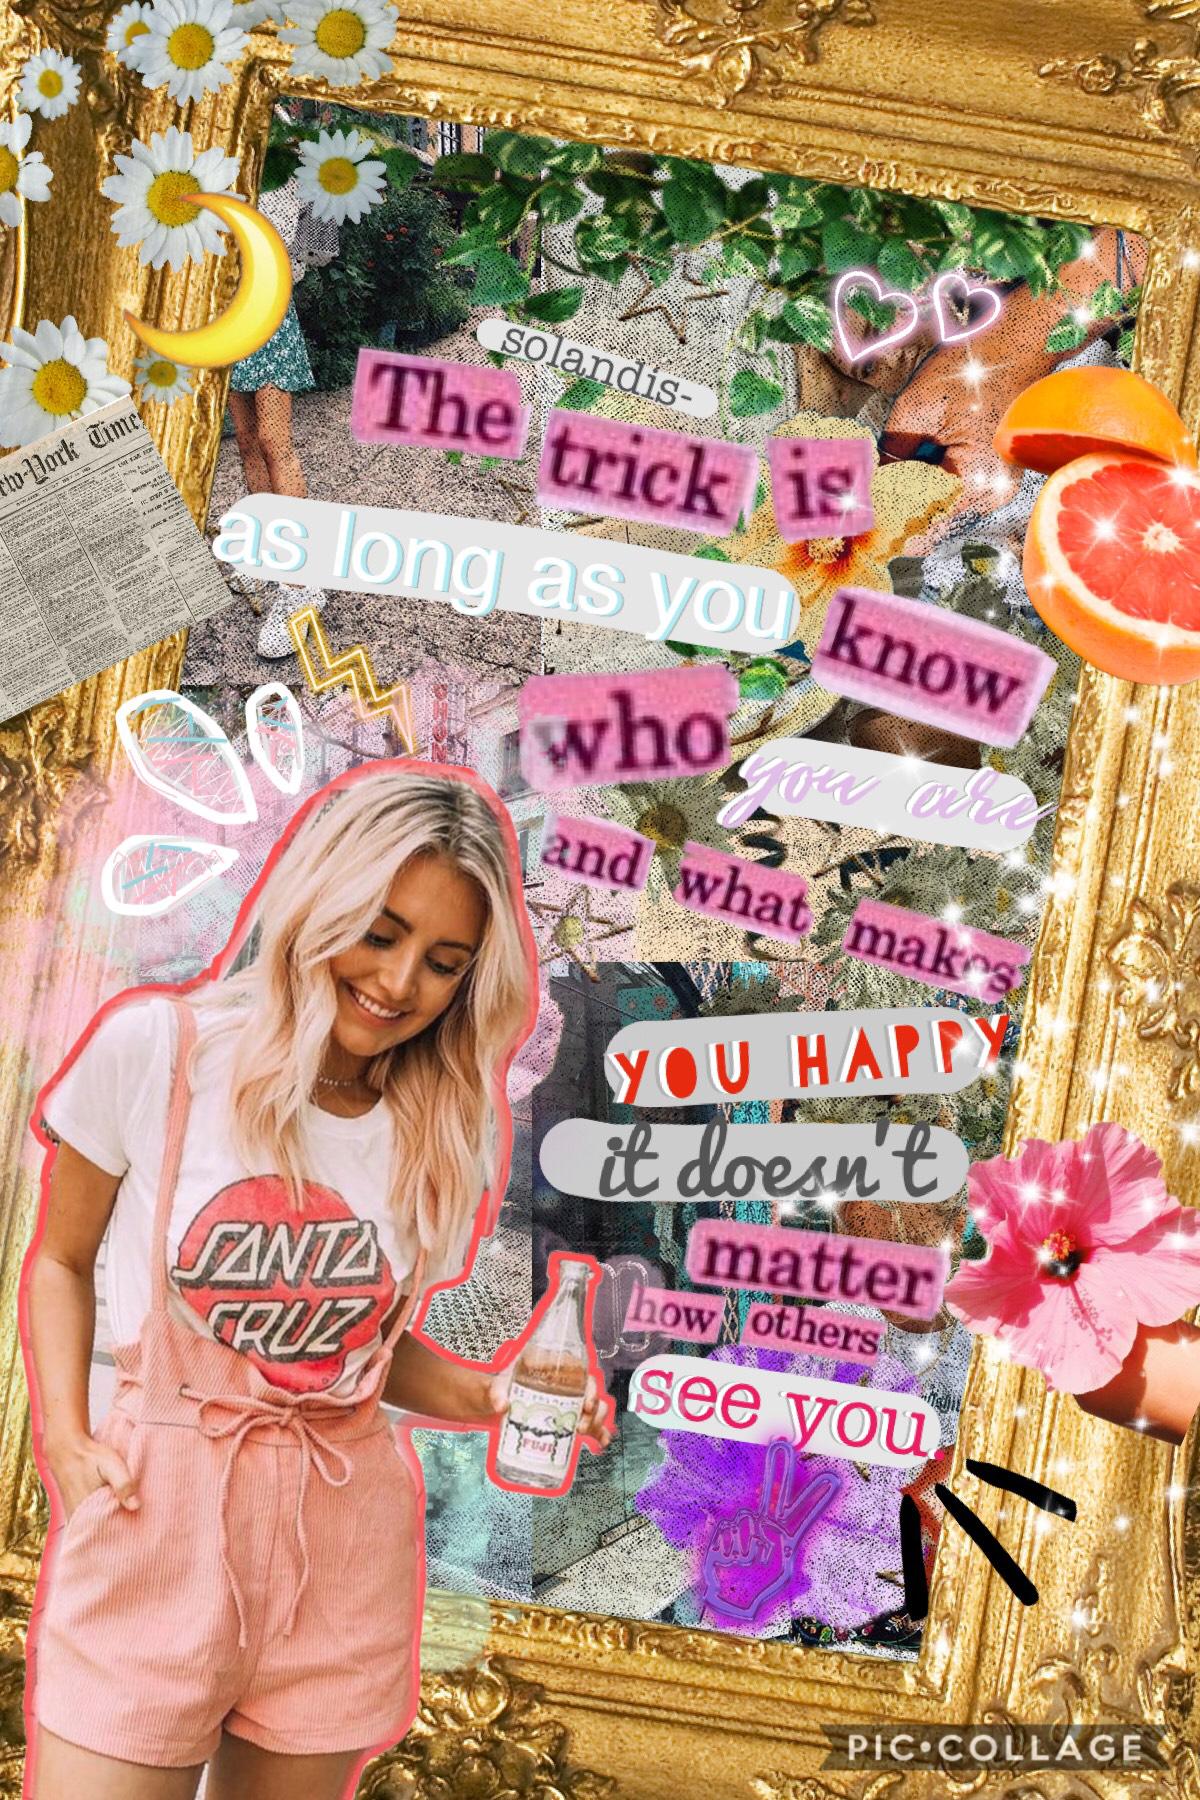 🌈✨t a p p y✨🌈 3.1.19.

It’s March 1st 🌈 woah life goes by fast 👌🏼 anyways hope you like dis collage ♥️ rate outa 10 ⭐️ I am stress free of like a million tests 👌🏼😂 woohoo 🥳 QOTD: sing 🎤 or dance 💃🏻 AOTD: I like to sing more but it’s hard to pick still ✨☀️